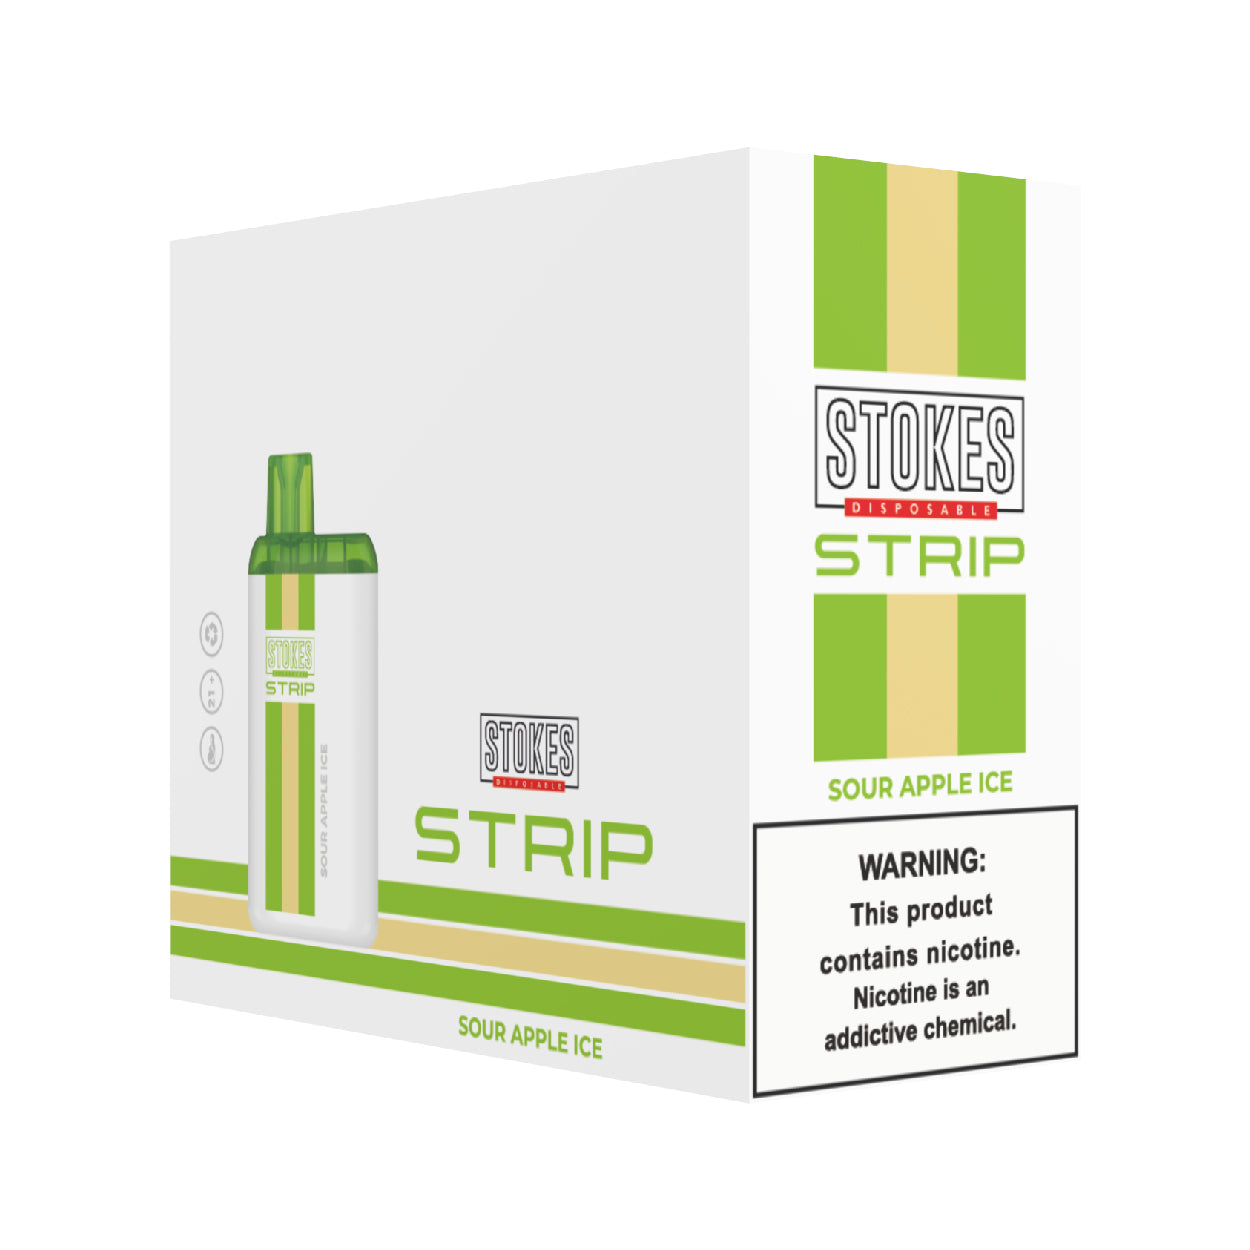 STOKES Strip - 5% Nic. (Disposable Device) - 4000 Puffs - Sour Apple Ice